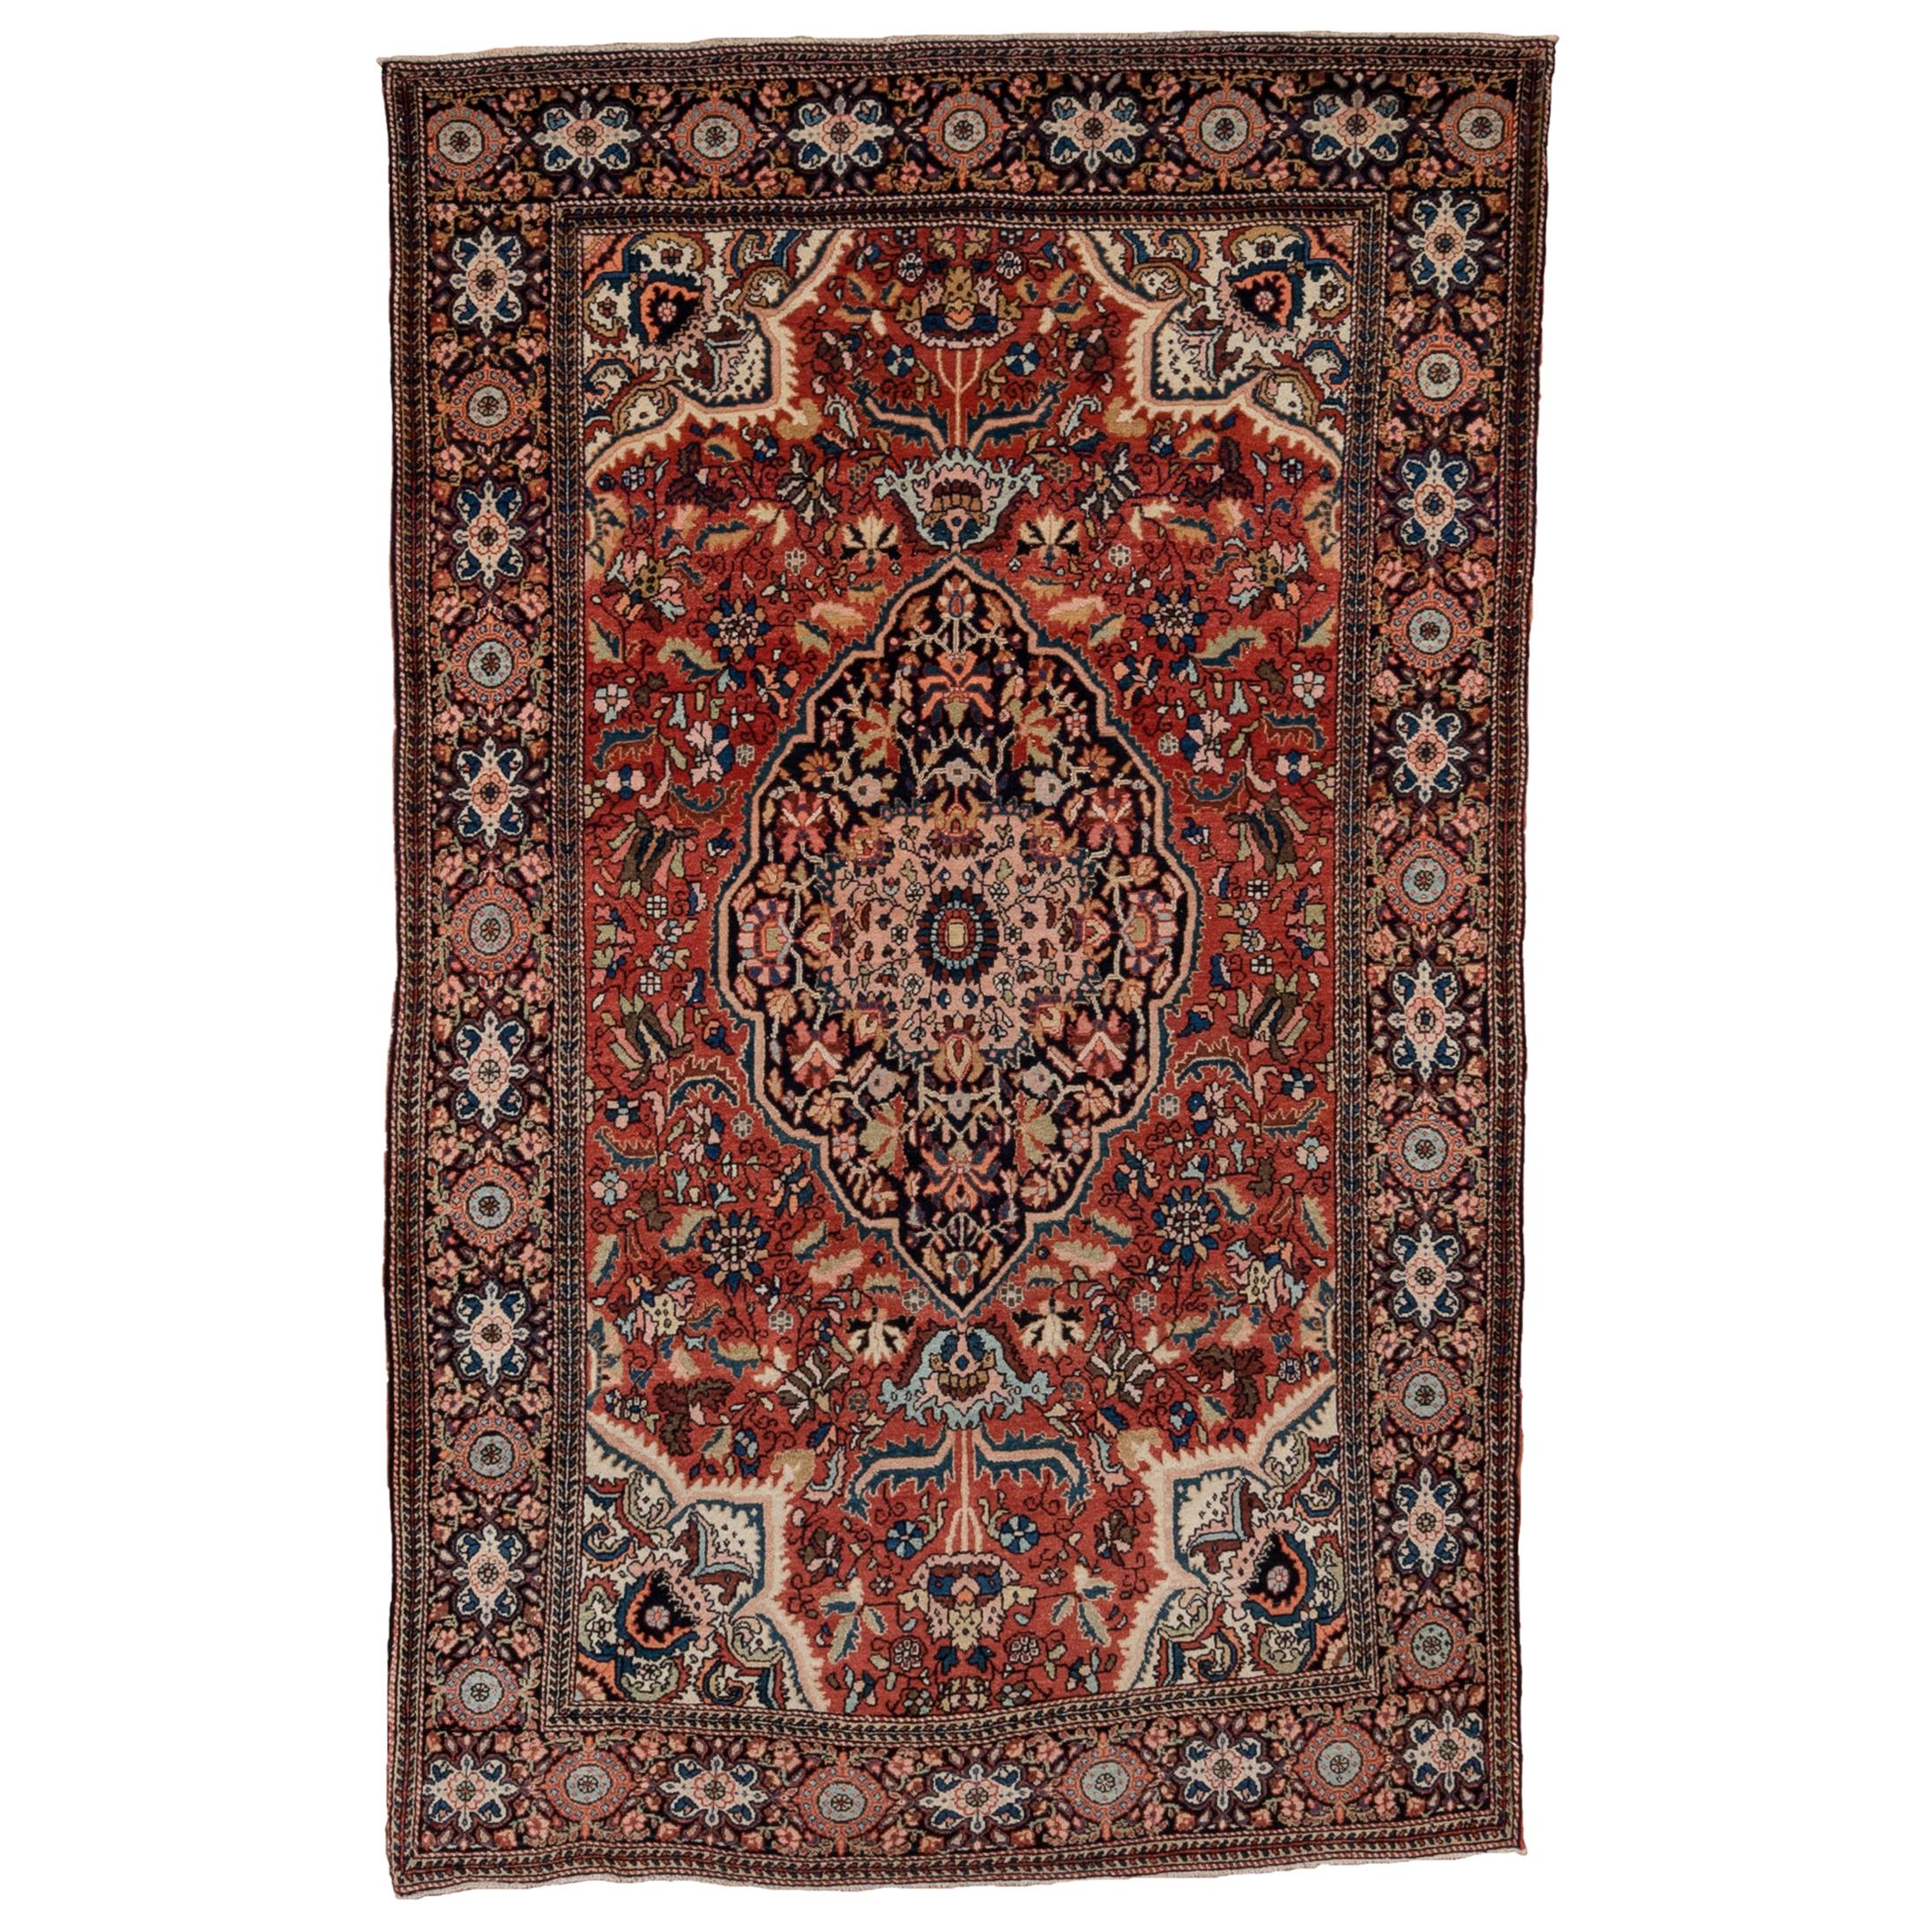 1910s Antique Persian Farahan Sarouk Rug, Red Field, Great Condition For Sale